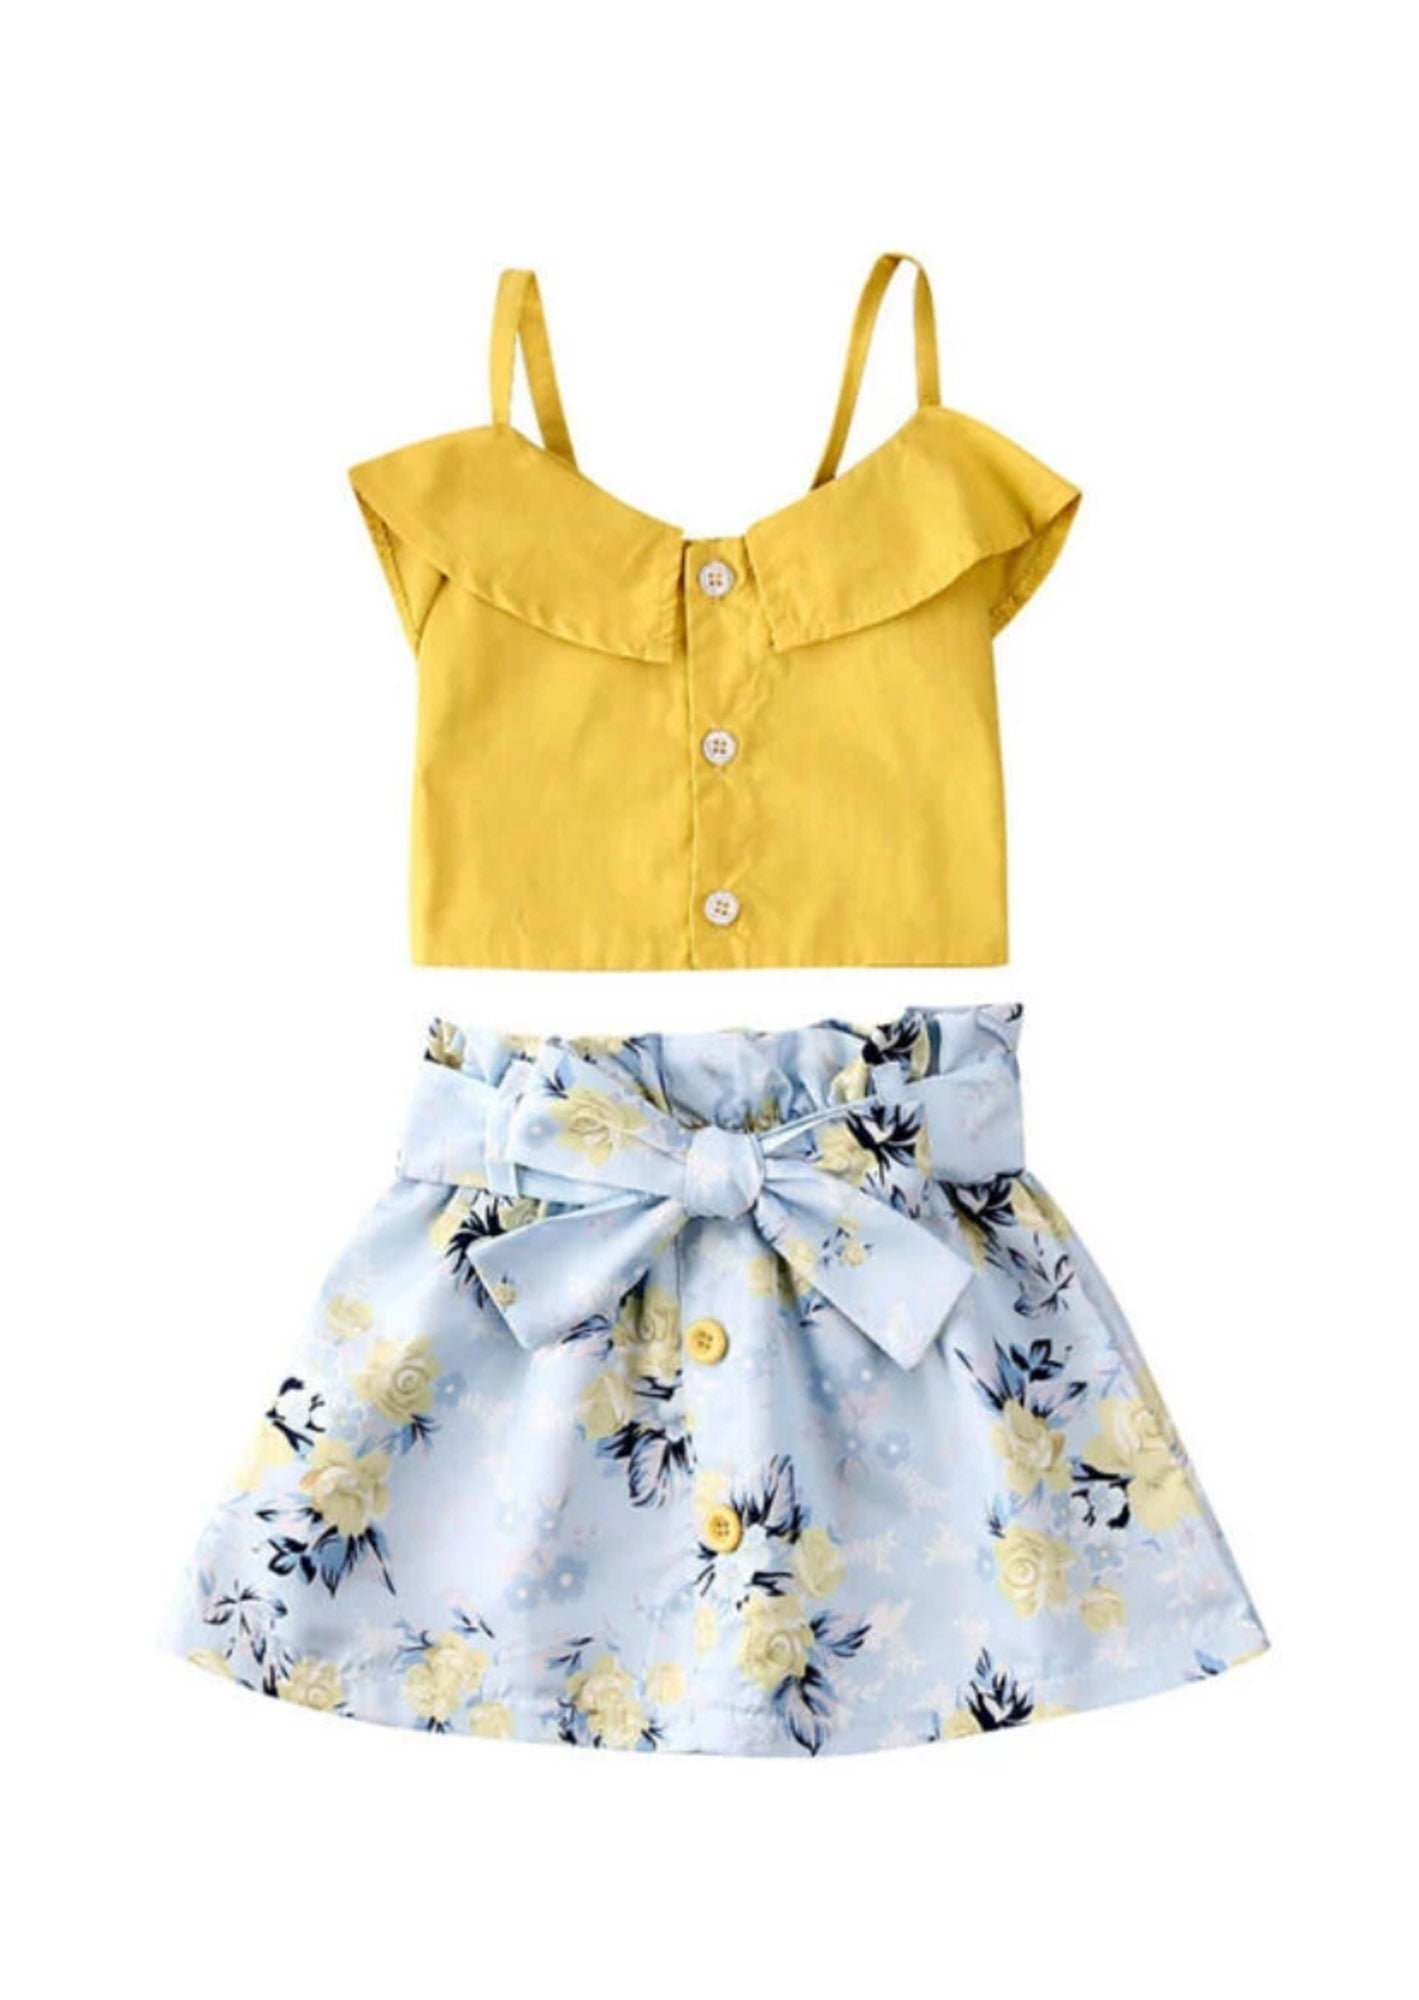 GIRLS - Blue with Yellow Floral Skirt and Top Set - Hannah Rose Vintage Boutique